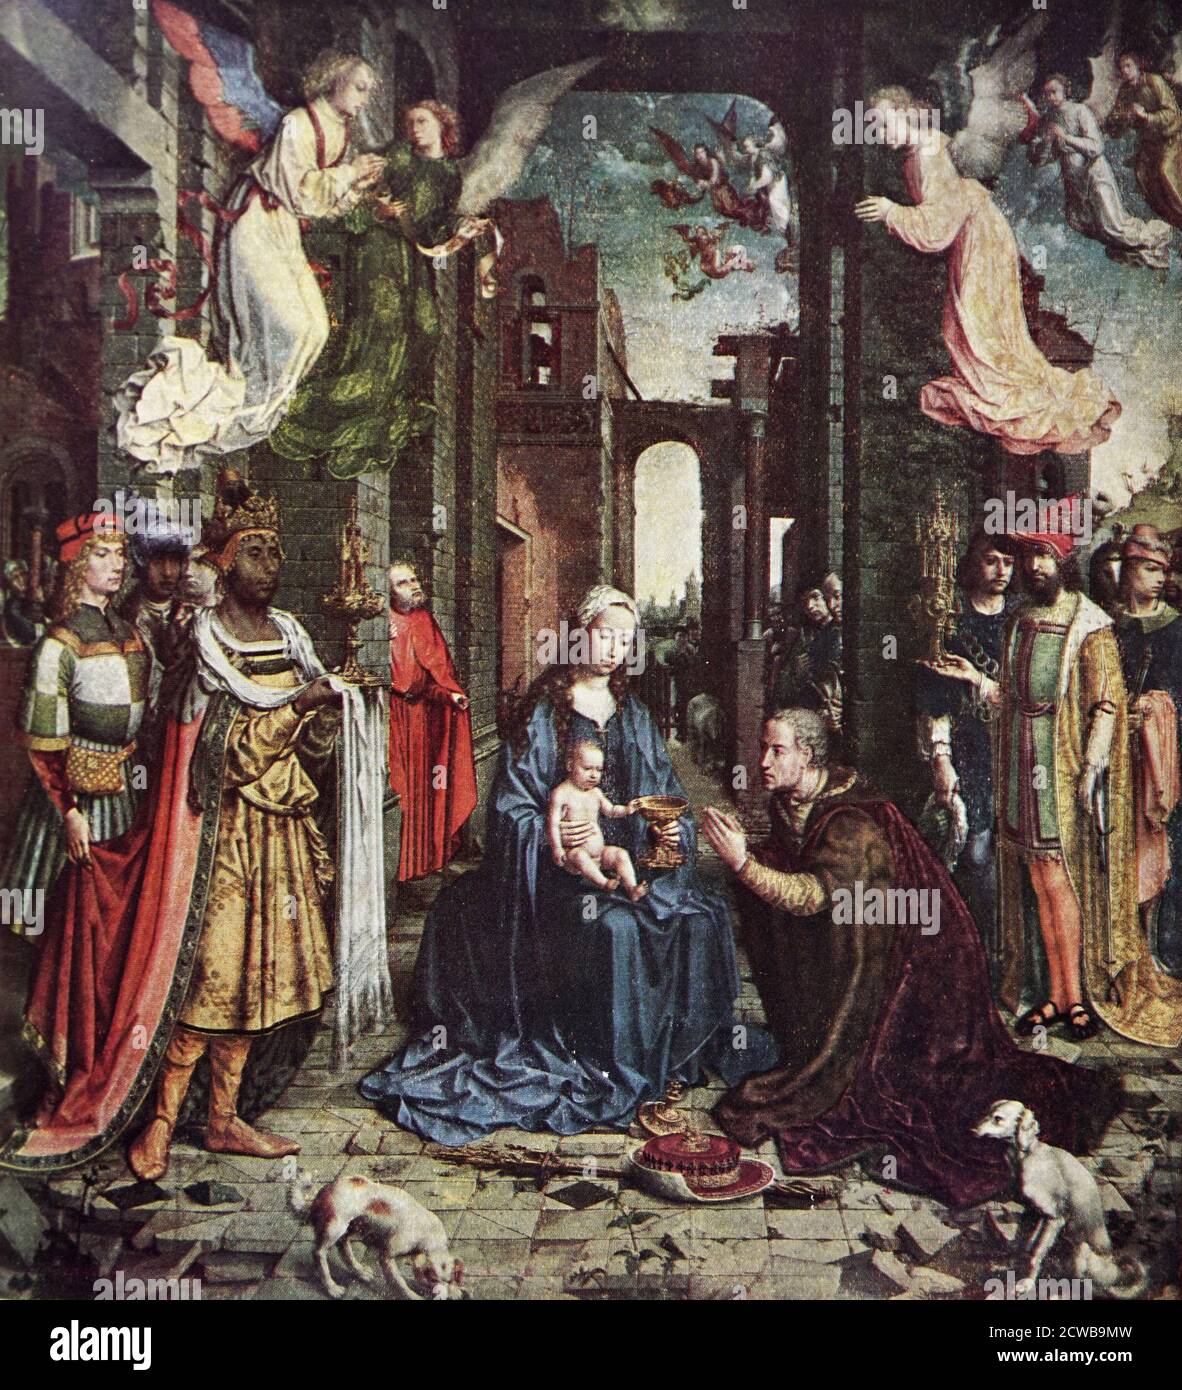 Painting titled 'The Adoration of the Kings' by Jan Gossaert (1478-1532) a French painter and member of the Guild of Saint Luke Stock Photo